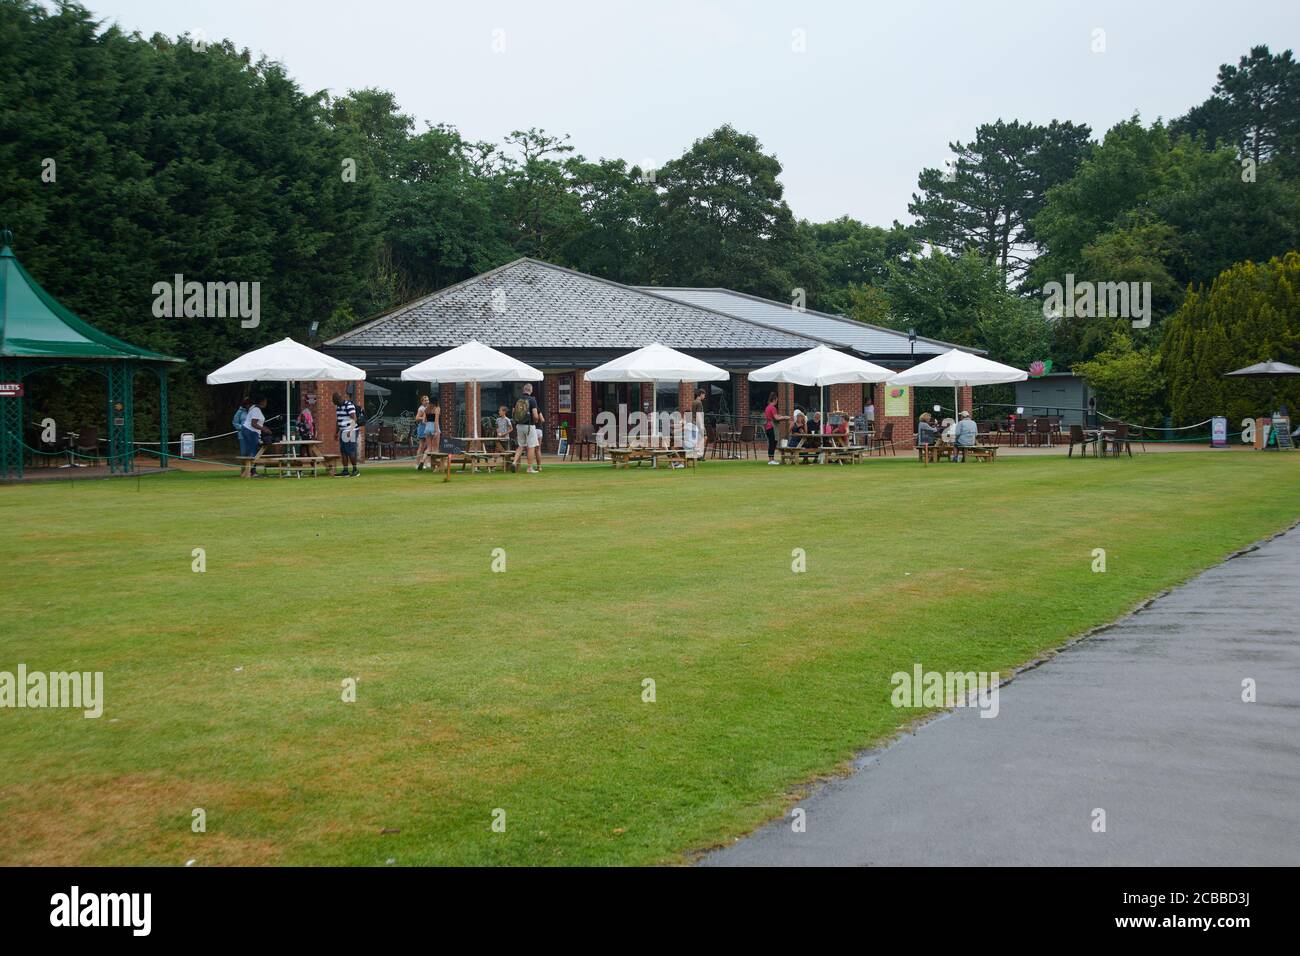 People eating outdoors during the corvid pandemic, in an English garden, East Yorkshire, England, UK, GB. Stock Photo